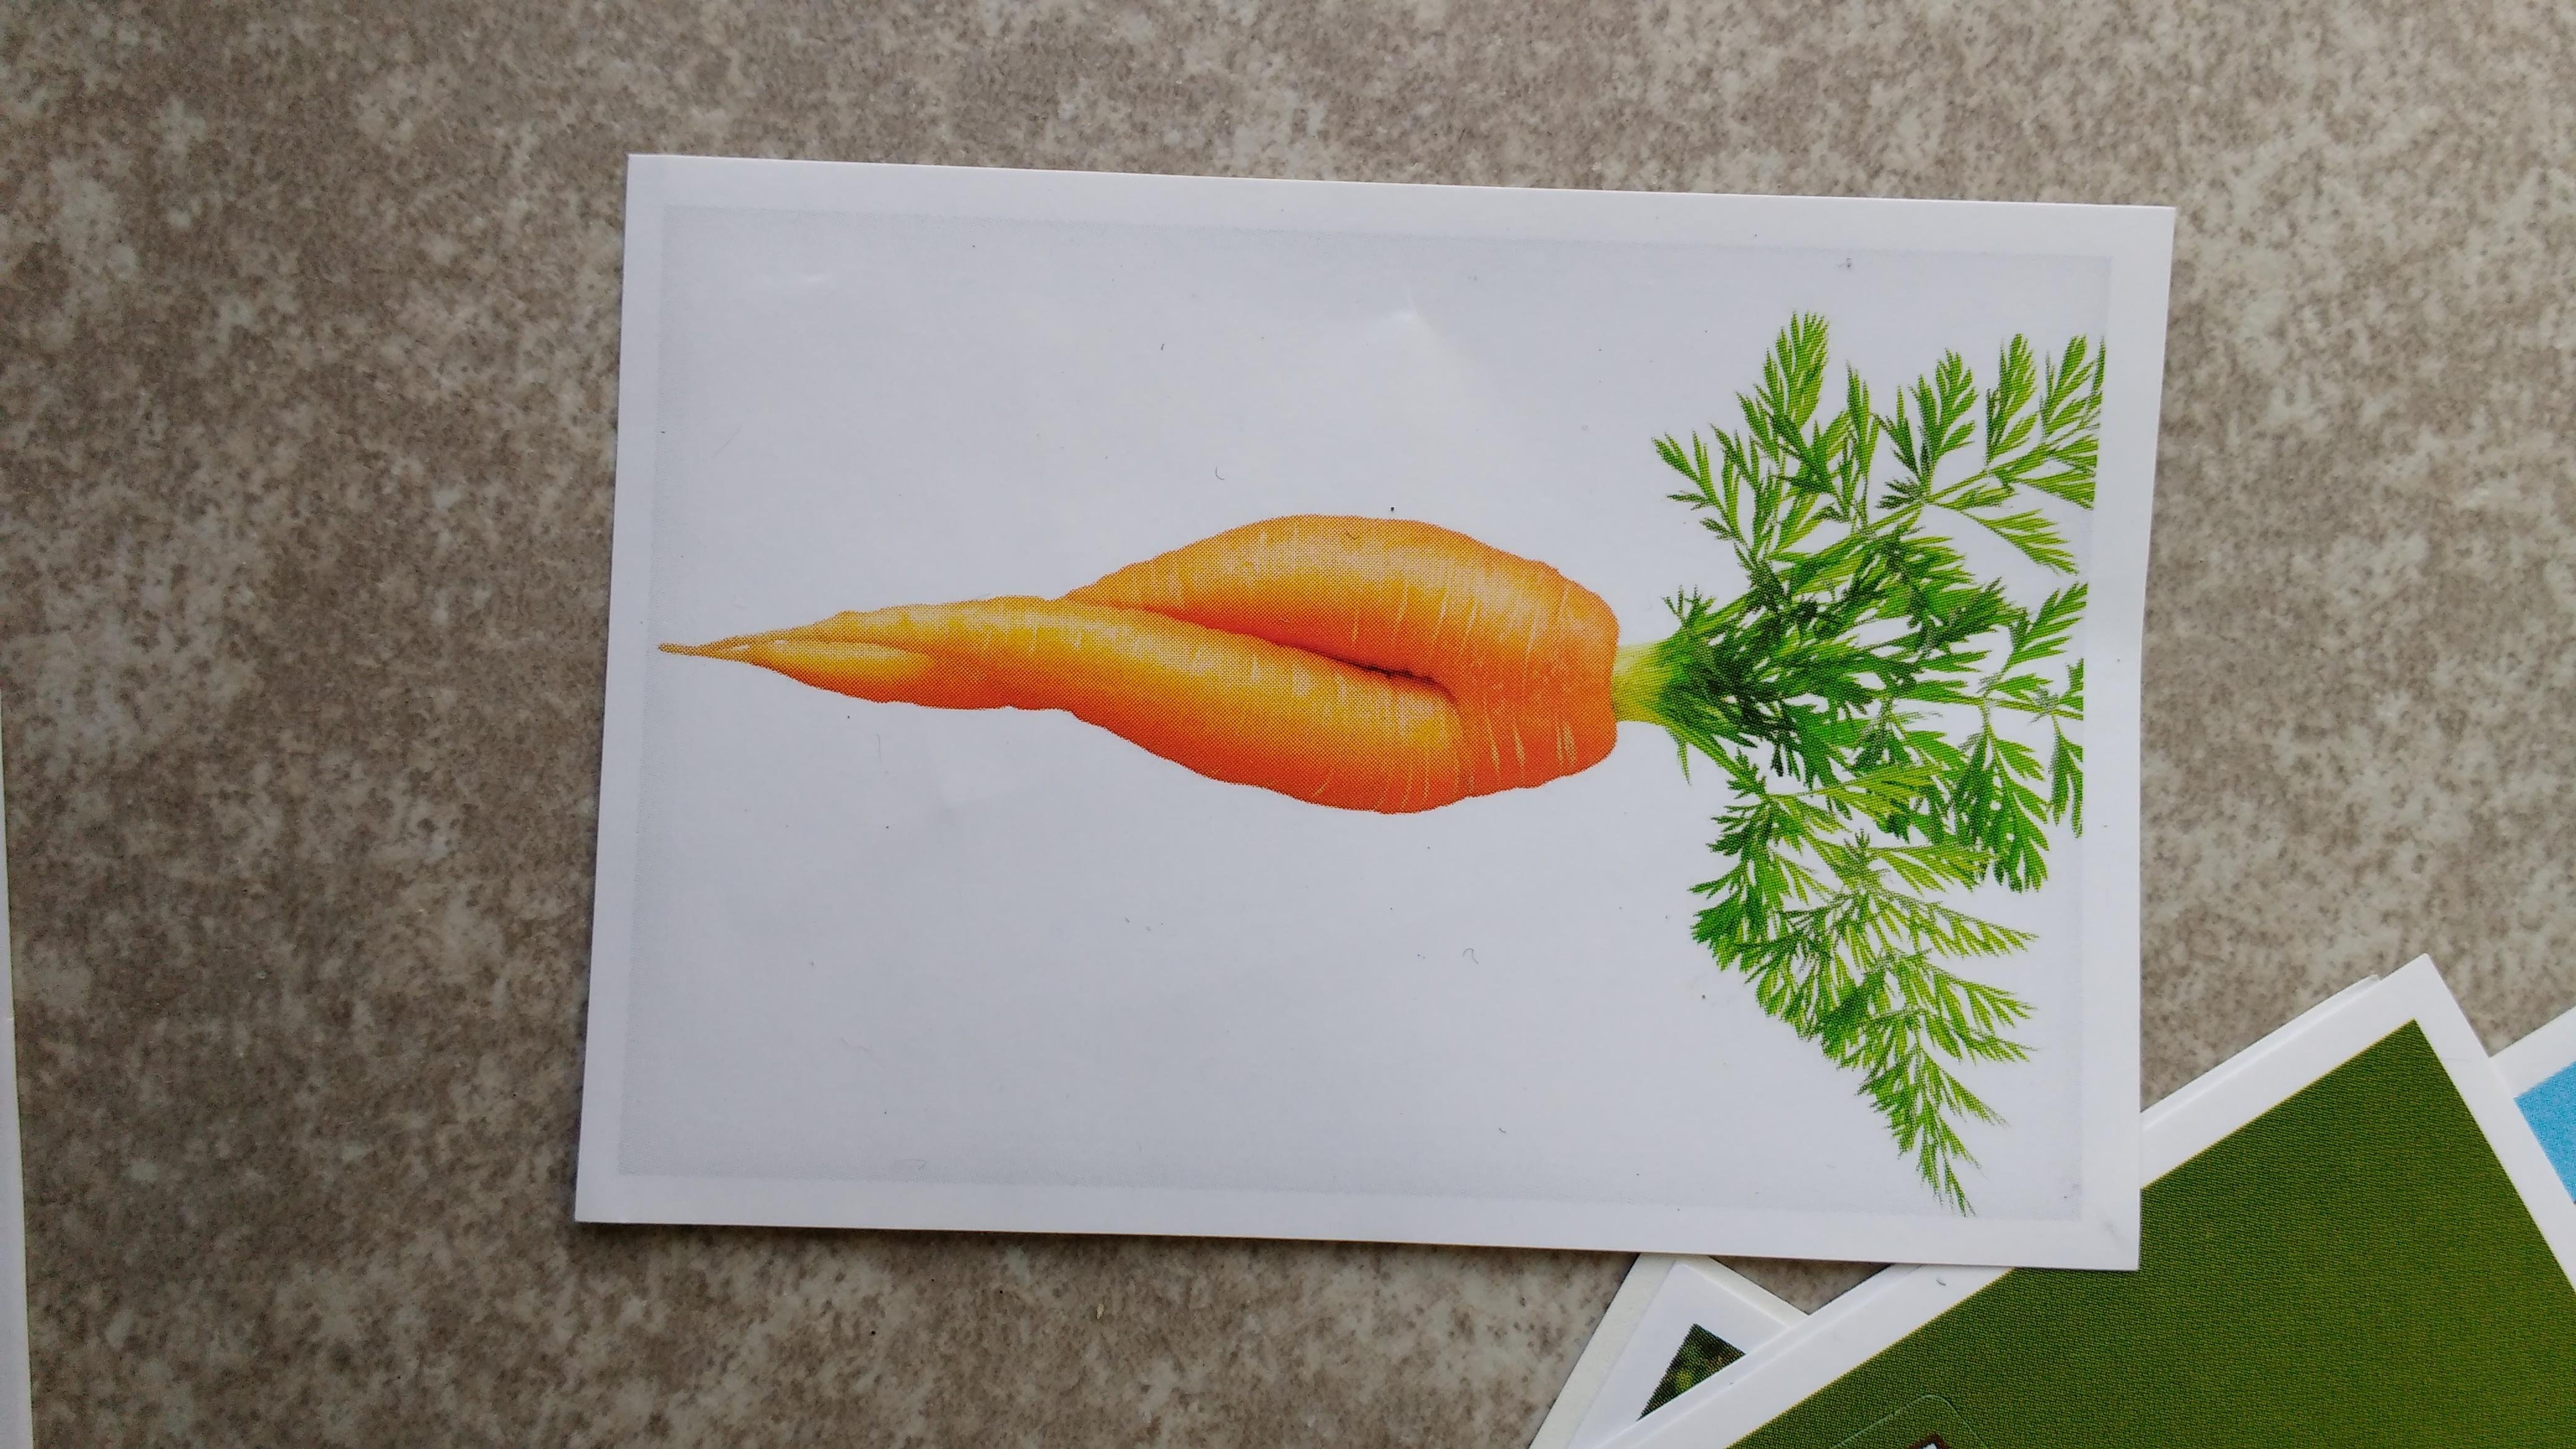 This picture of a carrot